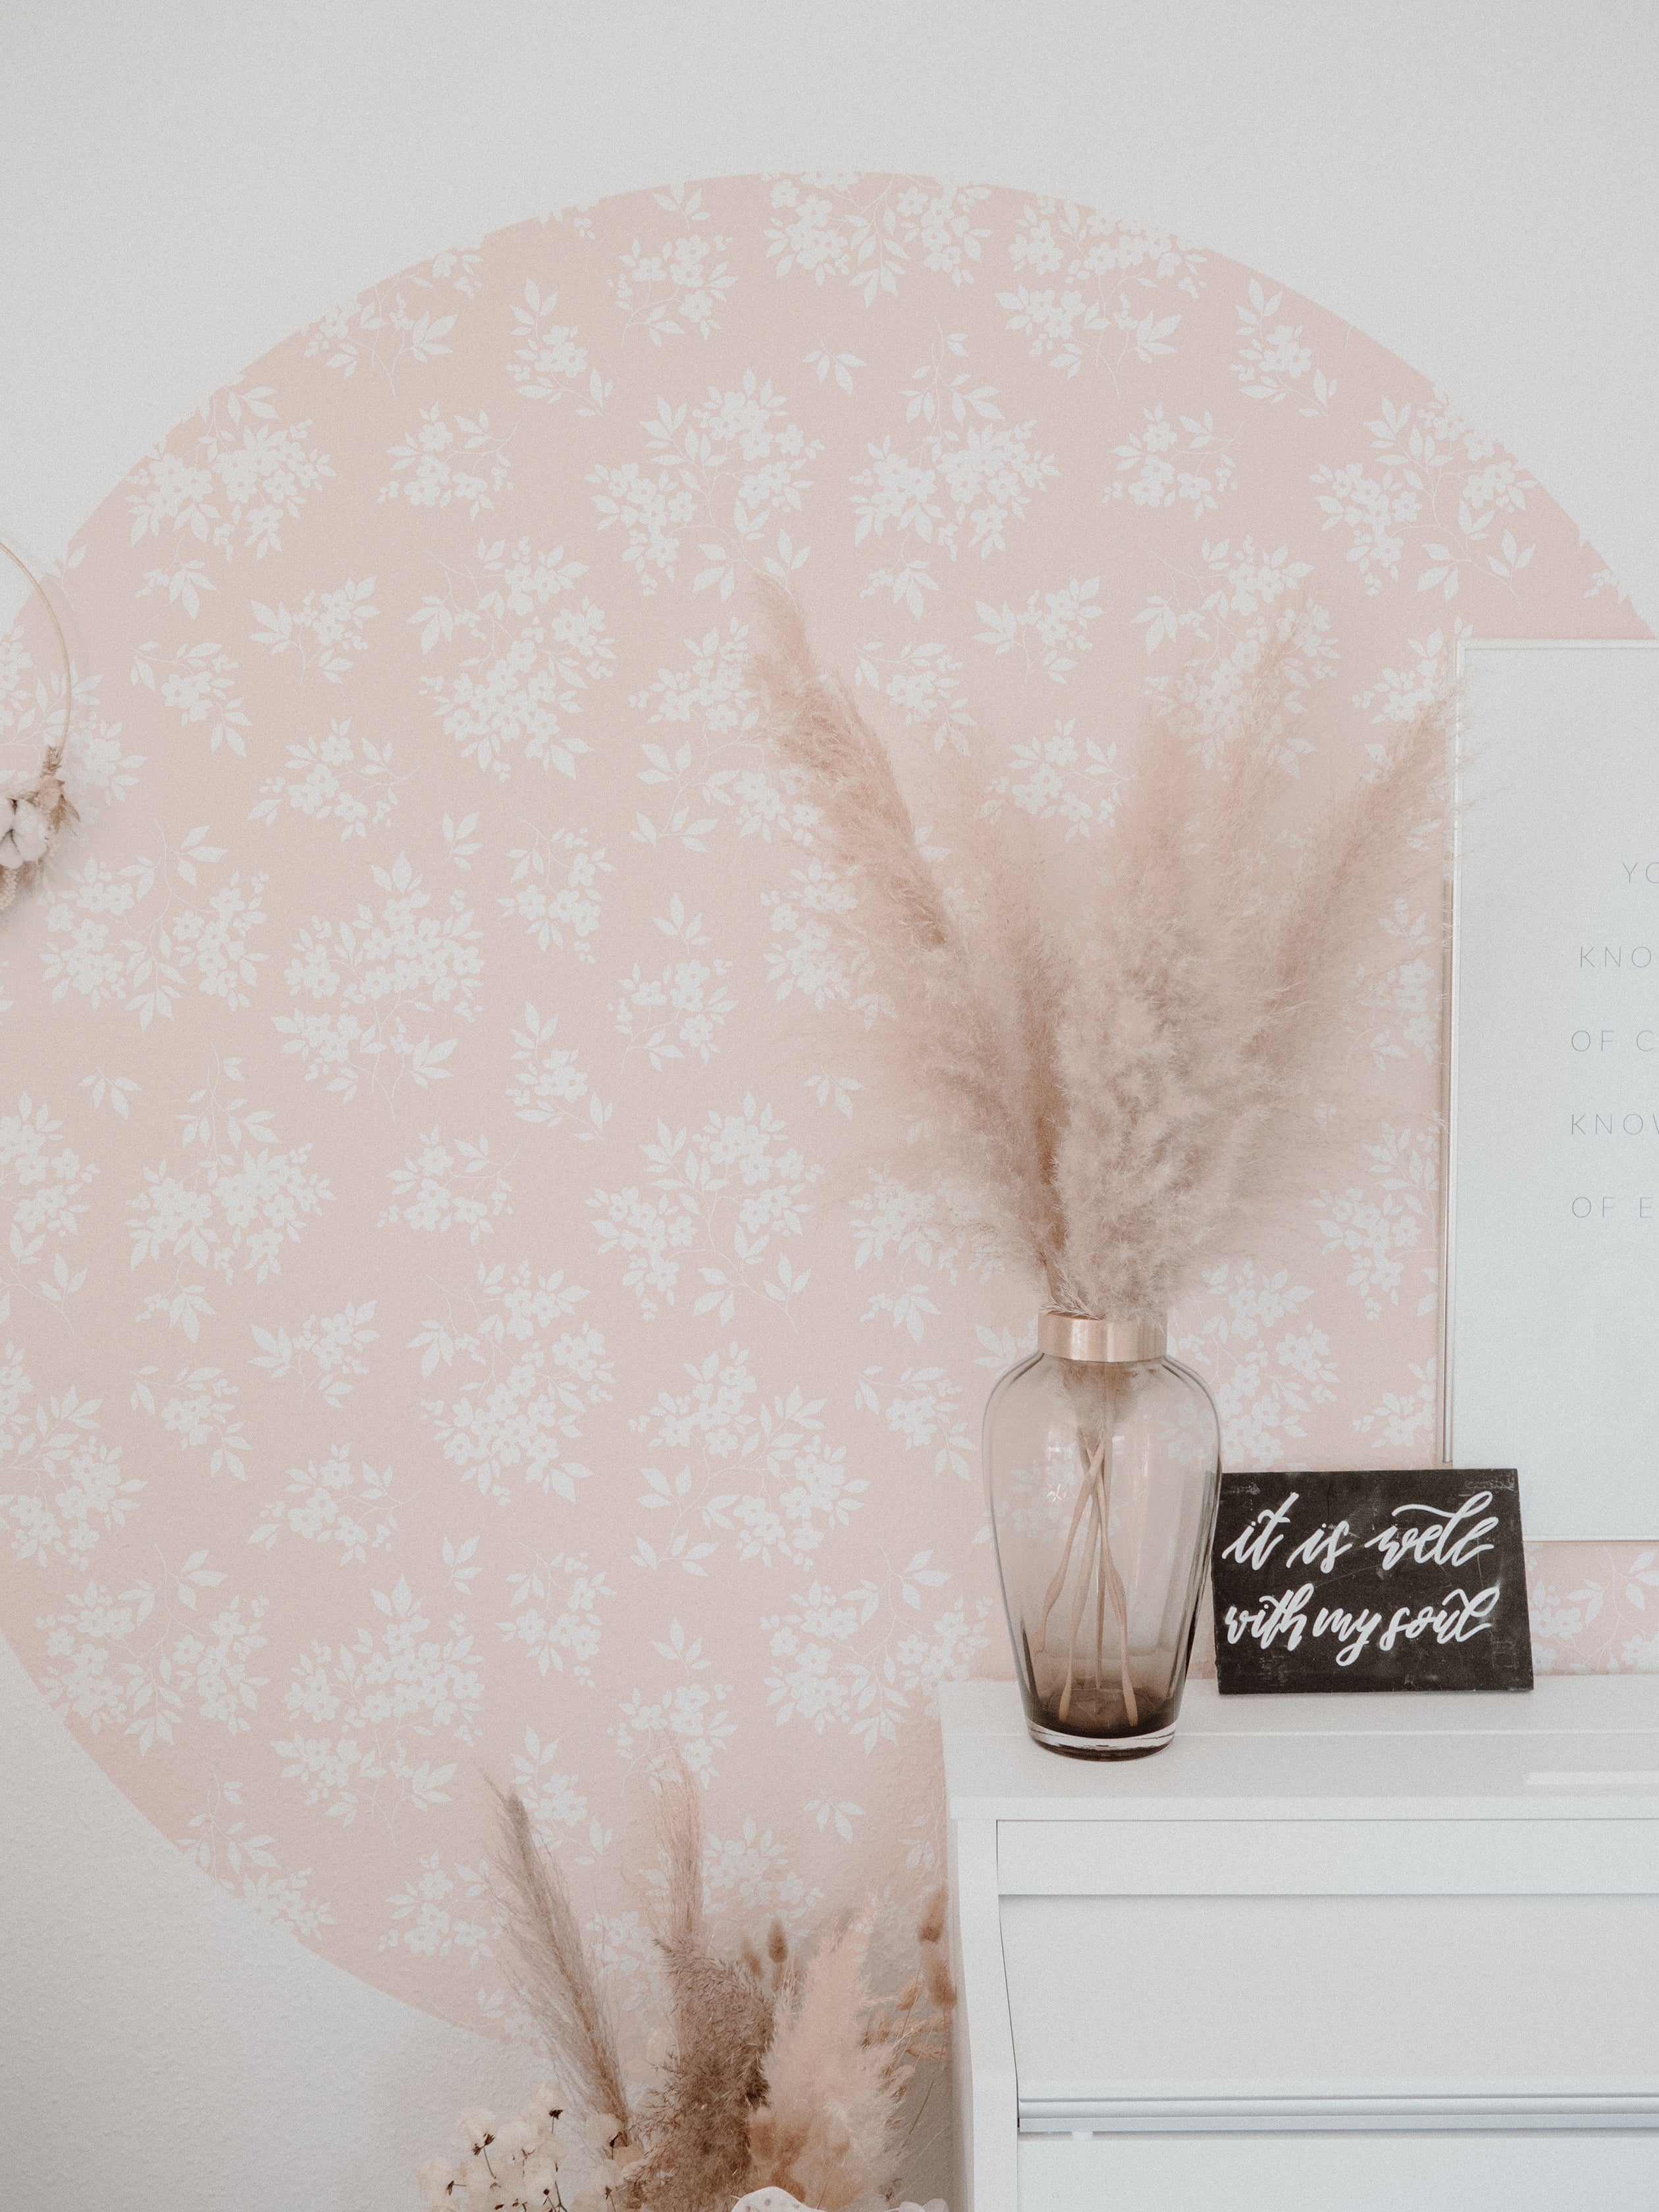 A stylish room corner featuring the Vintage Garden Floral Wallpaper in champagne. The wall is complemented by a rustic vase filled with pampas grass and a motivational quote sign, creating a cozy and inspirational space.